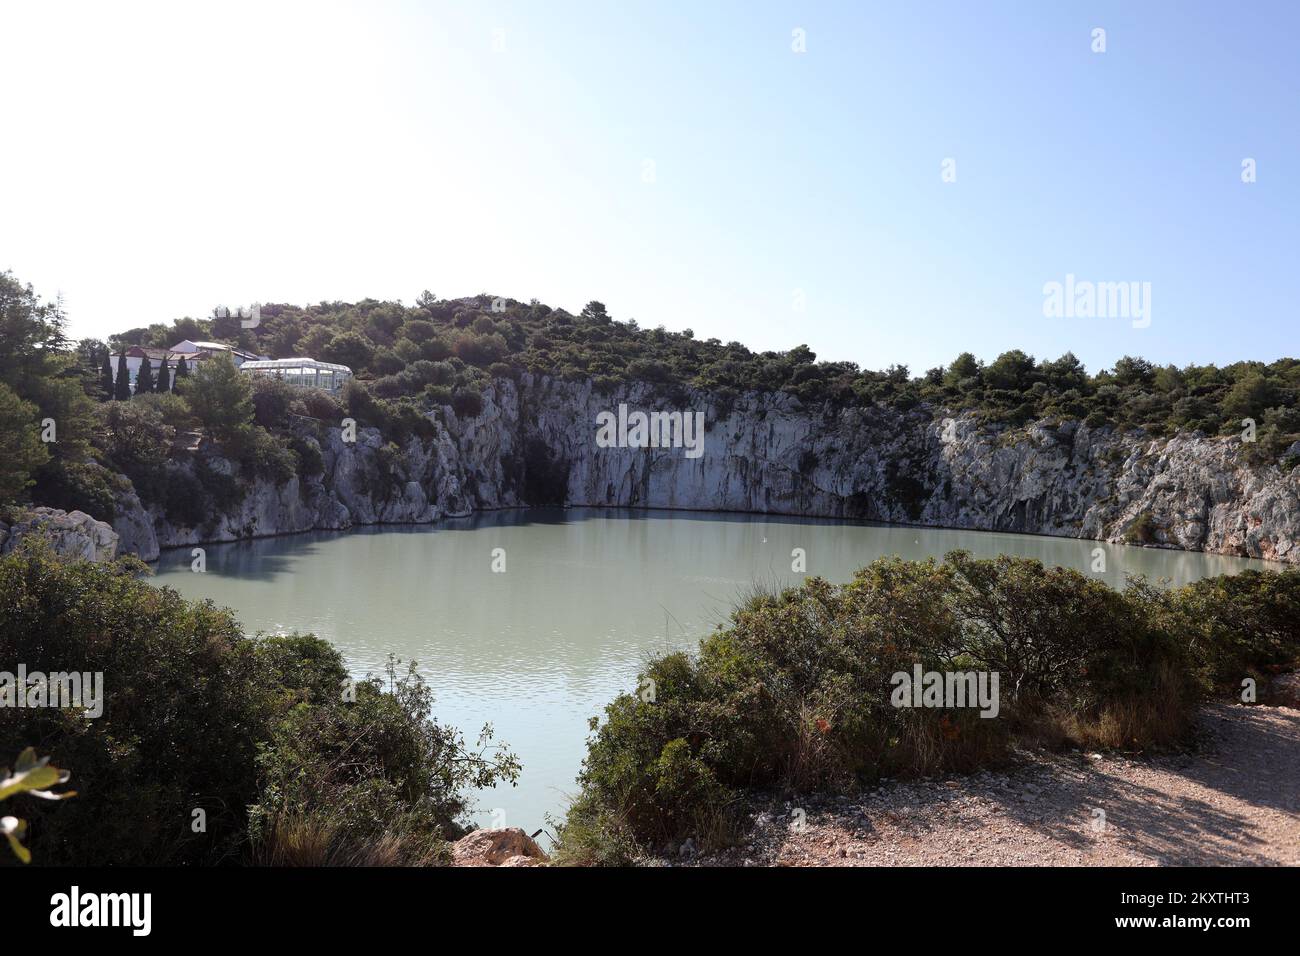 The picture shows sea lake Zmajevo oko (Dragon's eye) near Rogoznica, which has been declared the greatest mystery of the eastern Adriatic coast, has become muddy again and a stench reminiscent of rotten eggs is spreading around it. This cataclysm caused the death of living organisms., in Sibenik, Croatia, on October 15, 2021. Photo: Dusko Jaramaz/PIXSELL Stock Photo